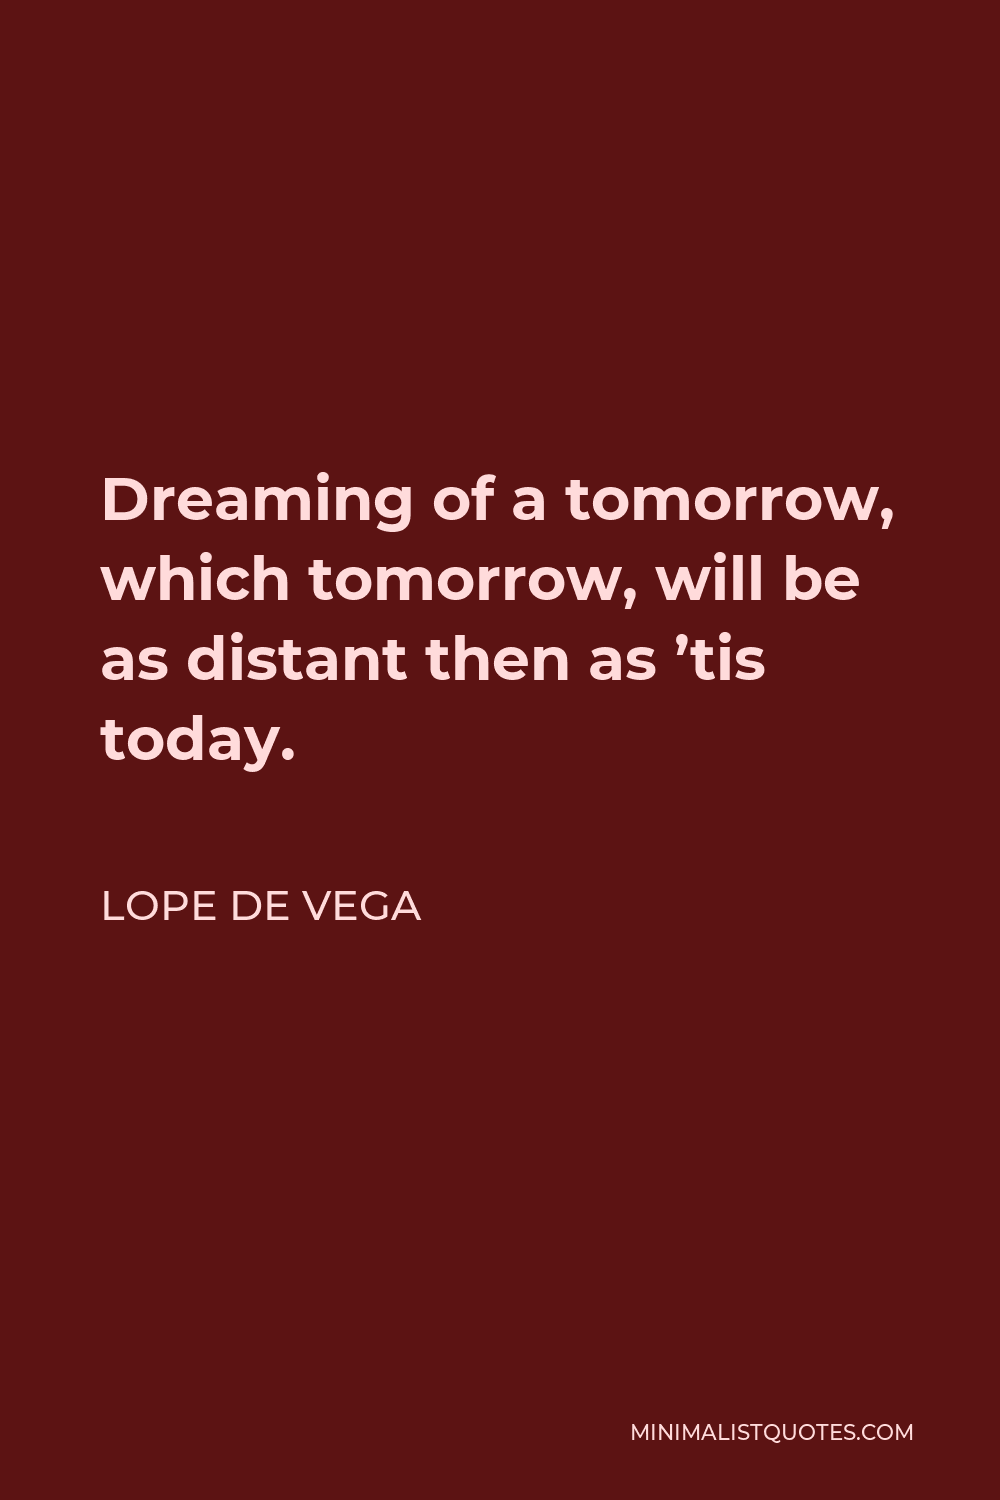 Lope de Vega Quote - Dreaming of a tomorrow, which tomorrow, will be as distant then as ’tis today.